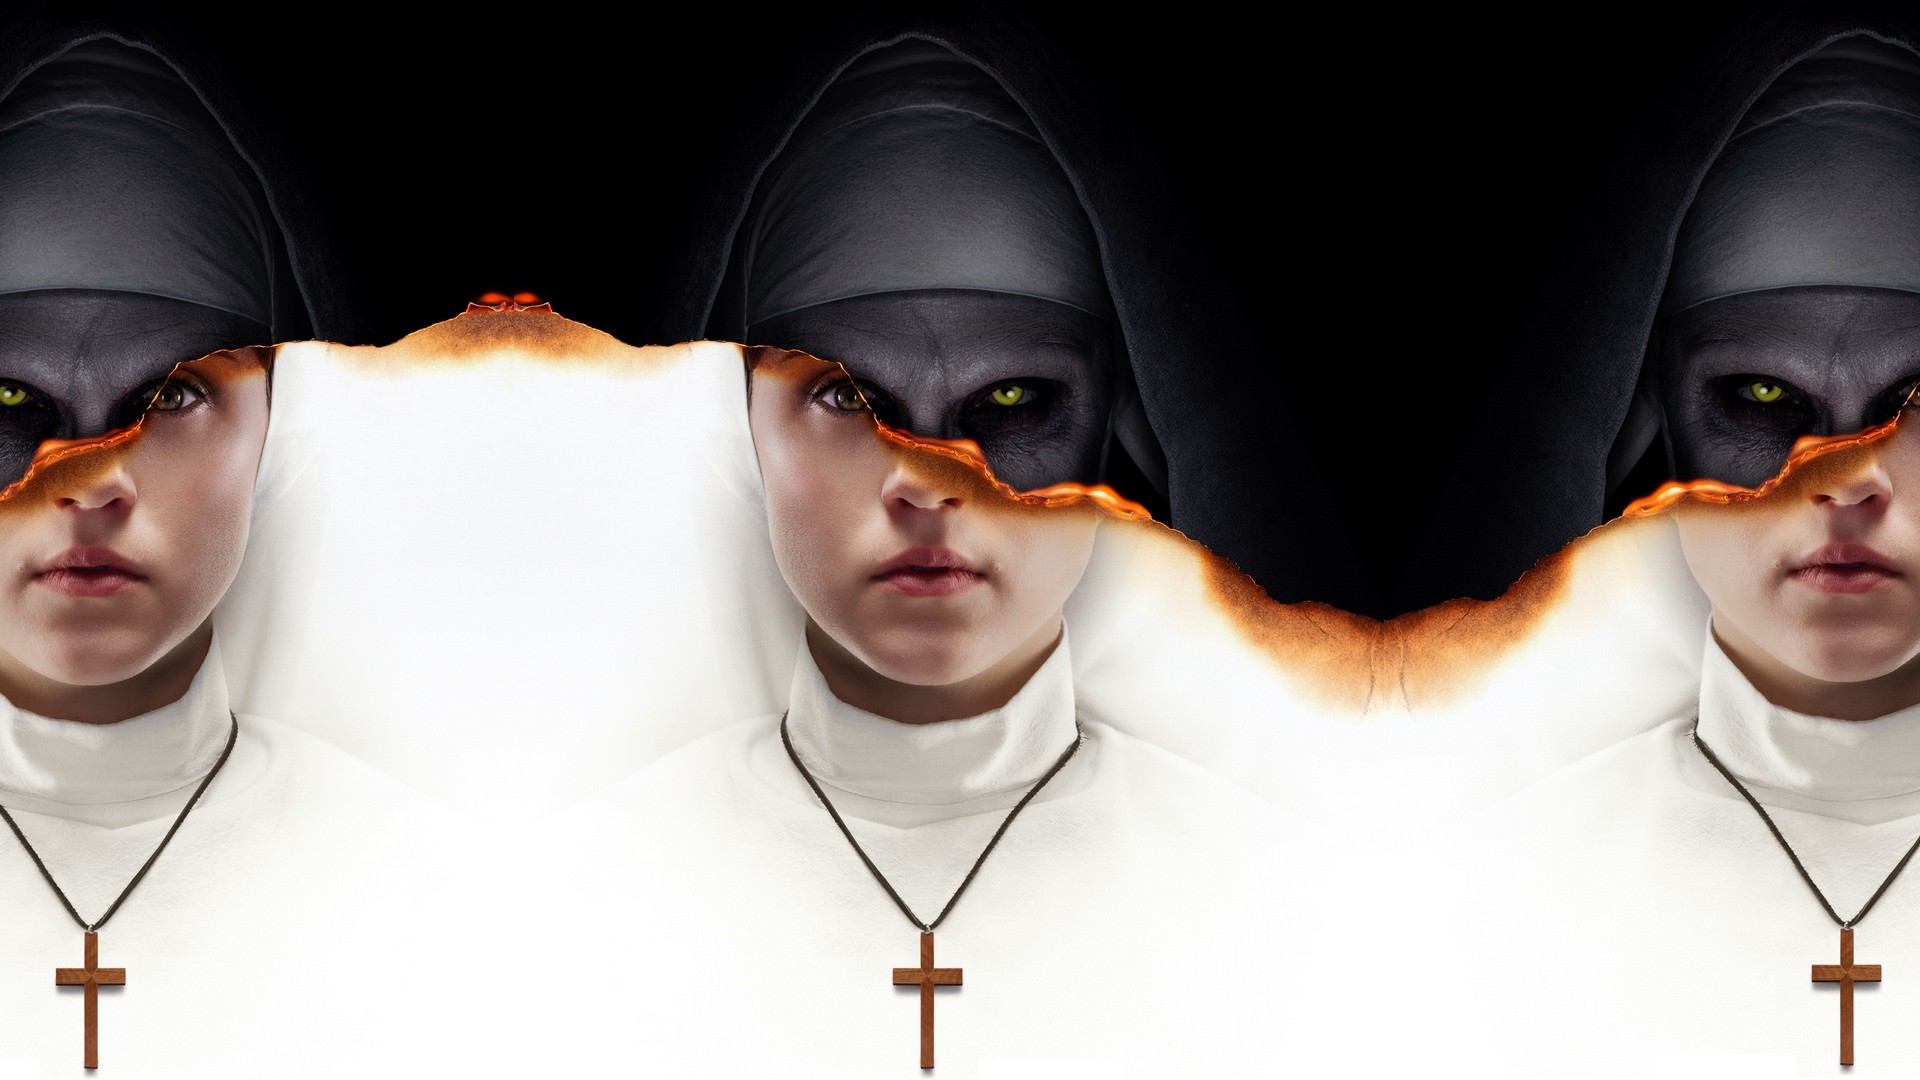 The Nun Poster Desktop Wallpaper with resolution 1920X1080 pixel. You can use this wallpaper as background for your desktop Computer Screensavers, Android or iPhone smartphones